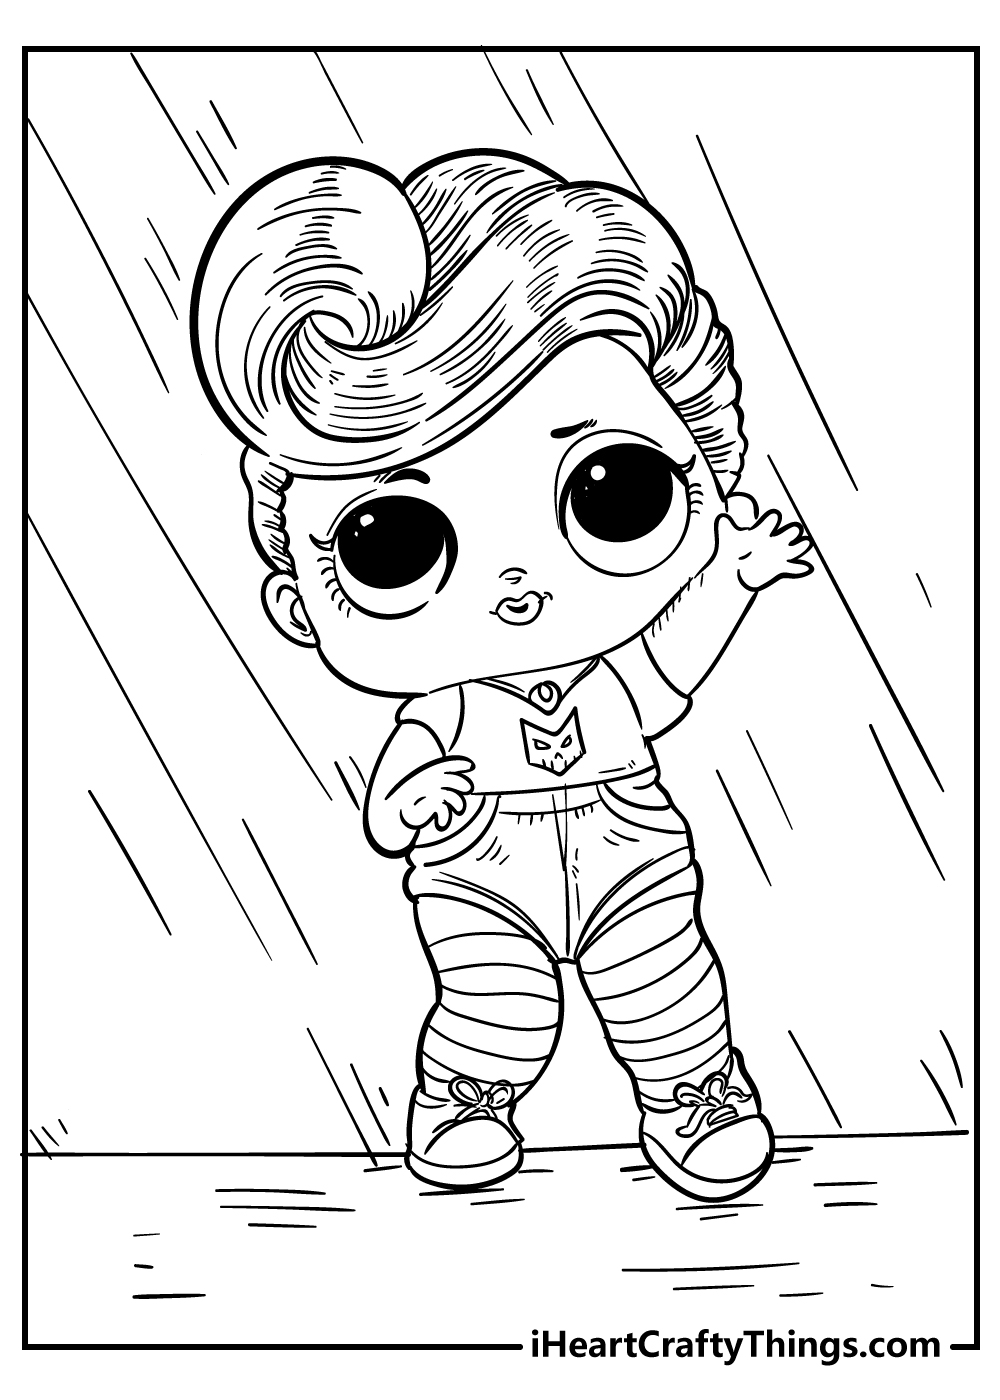 LOL doll coloring pages black and white download free